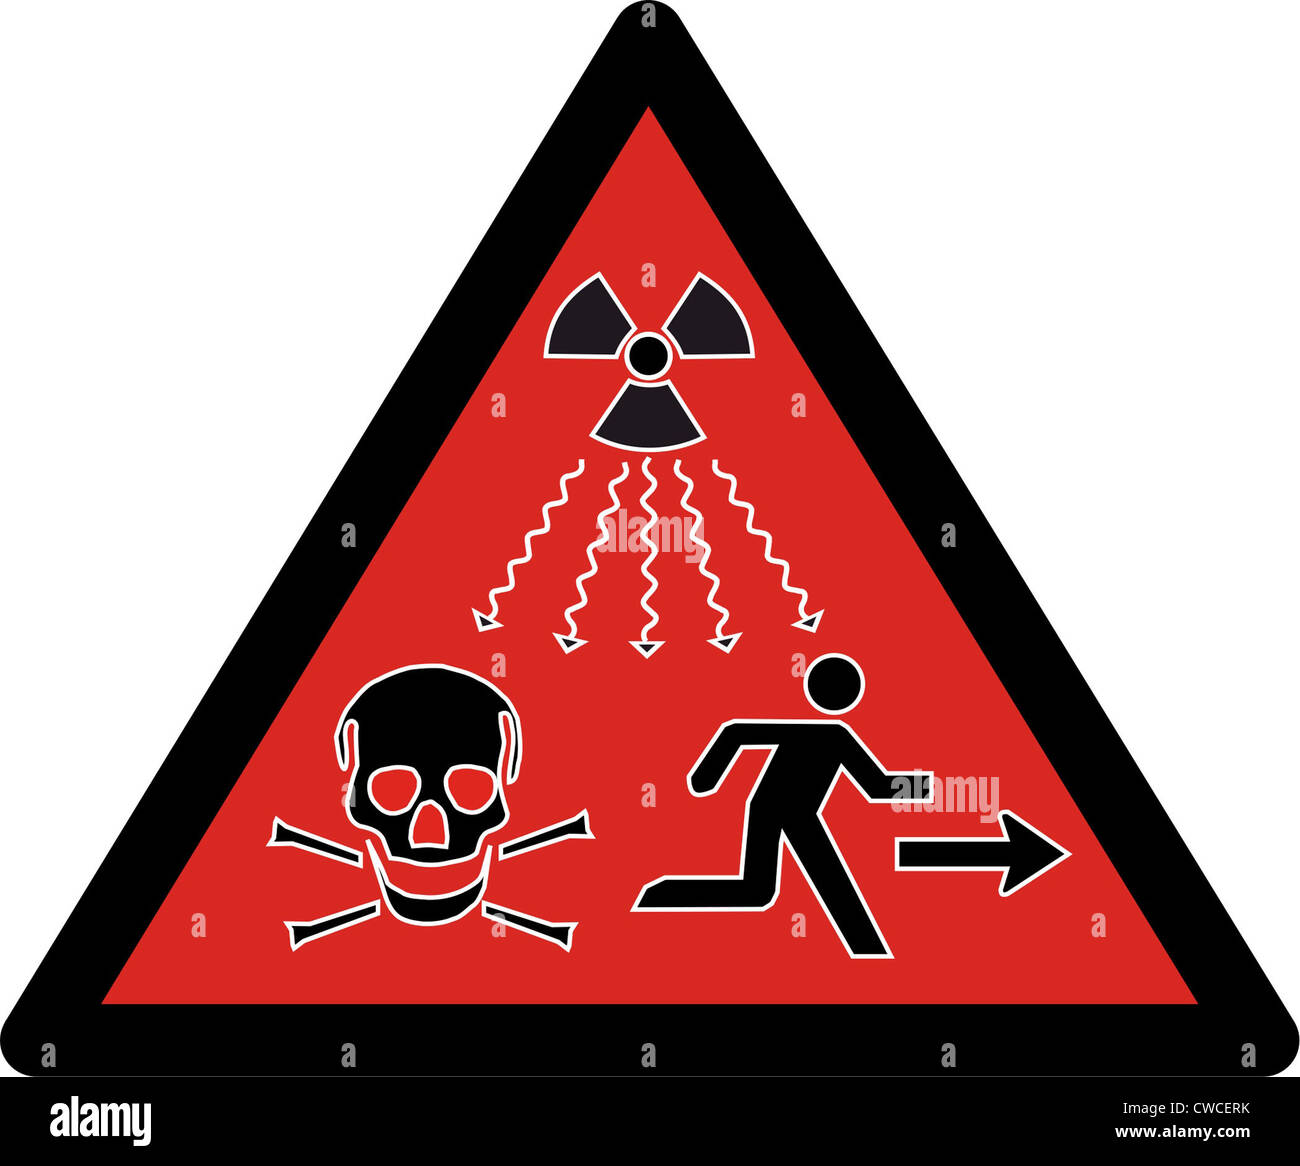 Pictogram message for future ages. In 2007 for the International Atomic Energy Agency designed it to warn future generations to Stock Photo